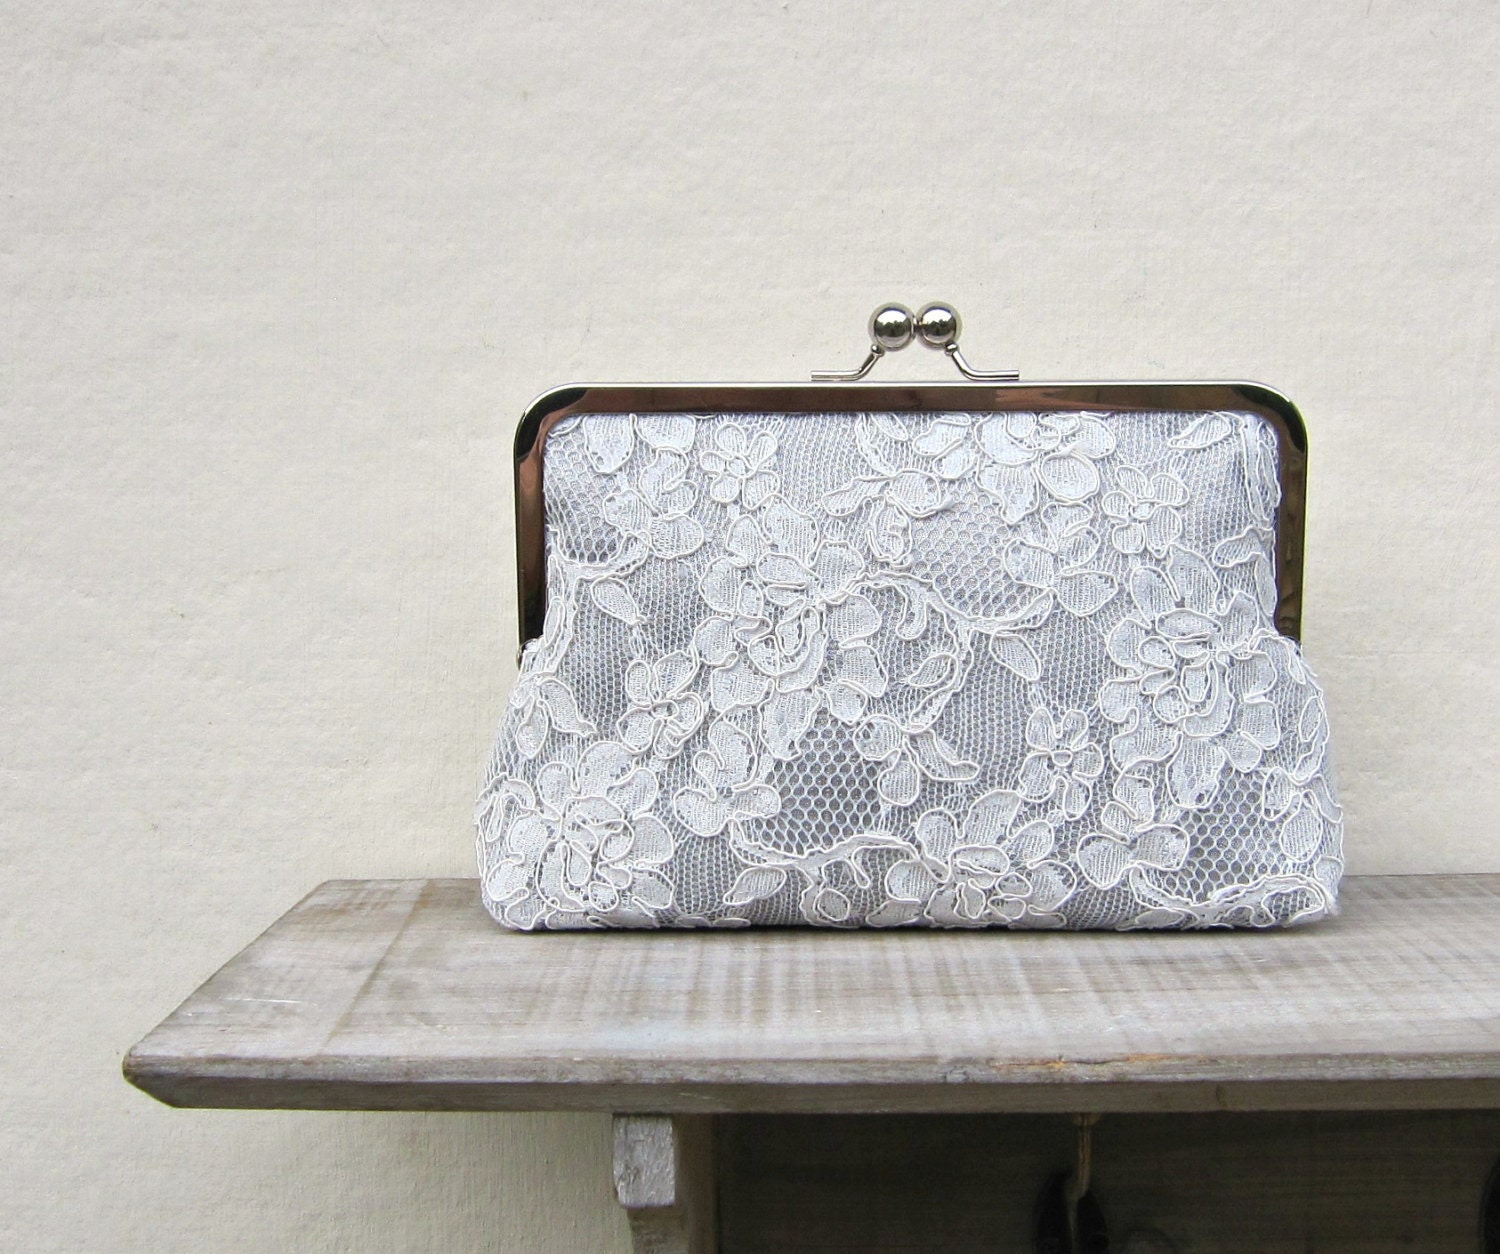 Alencon Lace Bridesmaids Clutch in Silvery Grey mother of the bride Wedding Gift Bridesmaids Gift